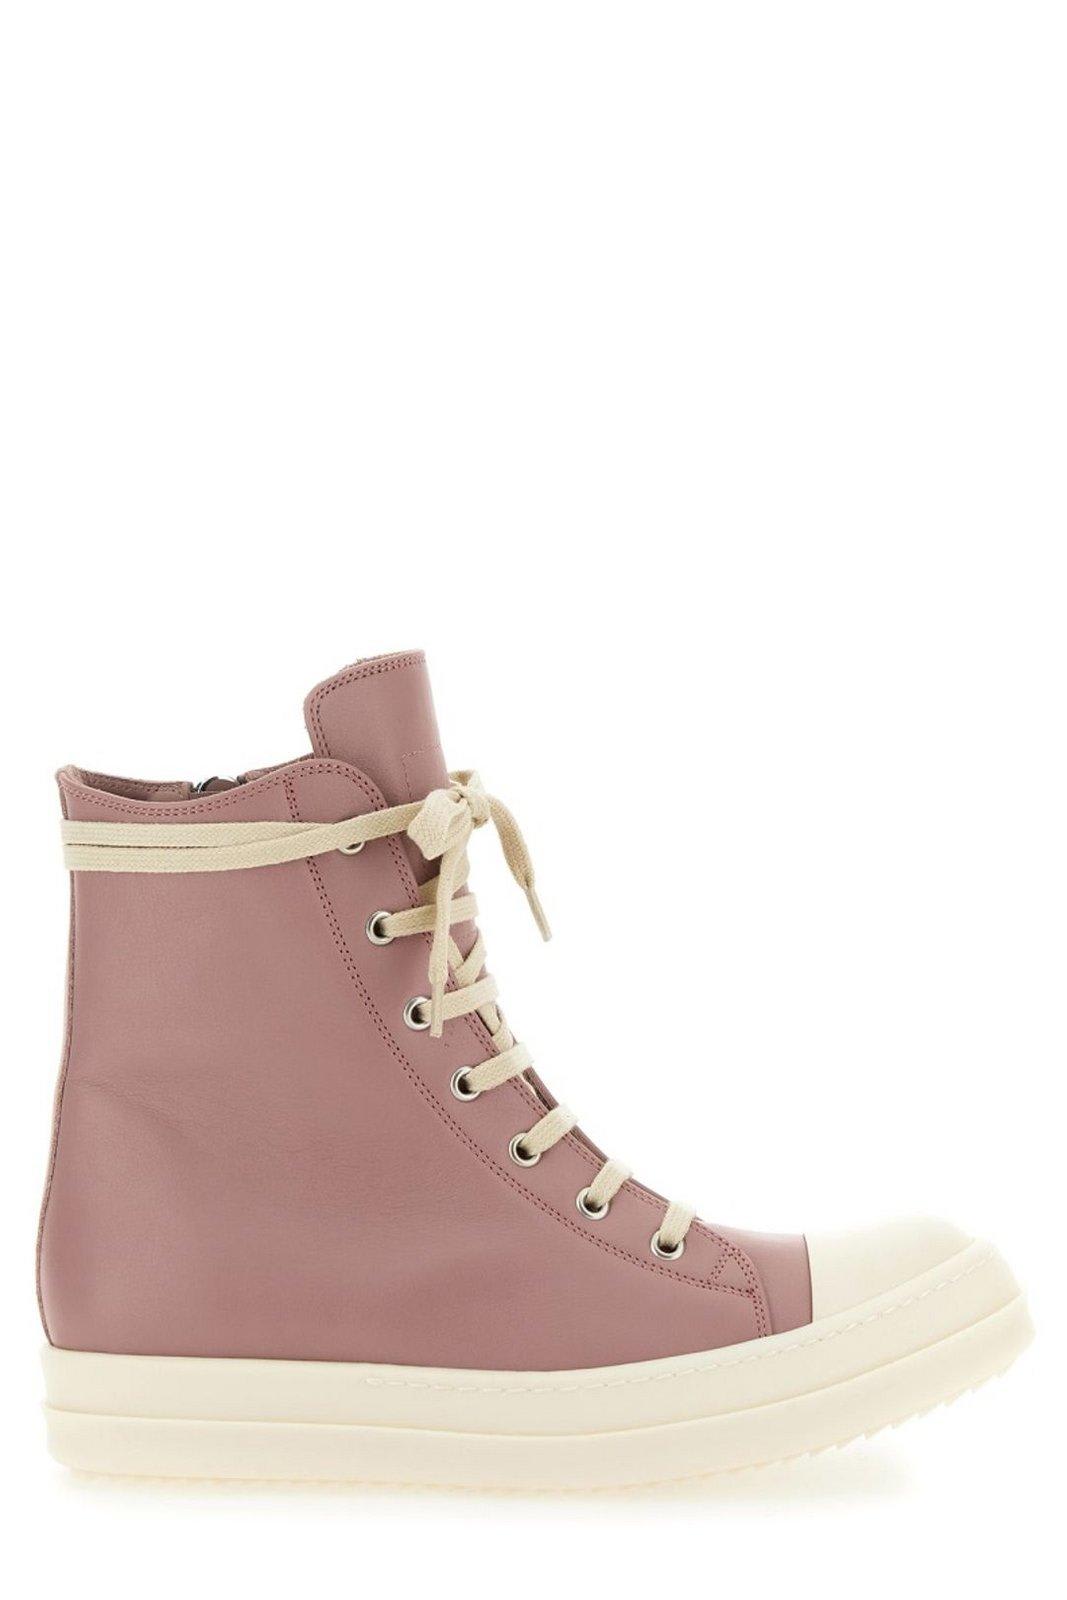 Shop Rick Owens Round-toe High-top Sneakers In Dusty Pink Milk